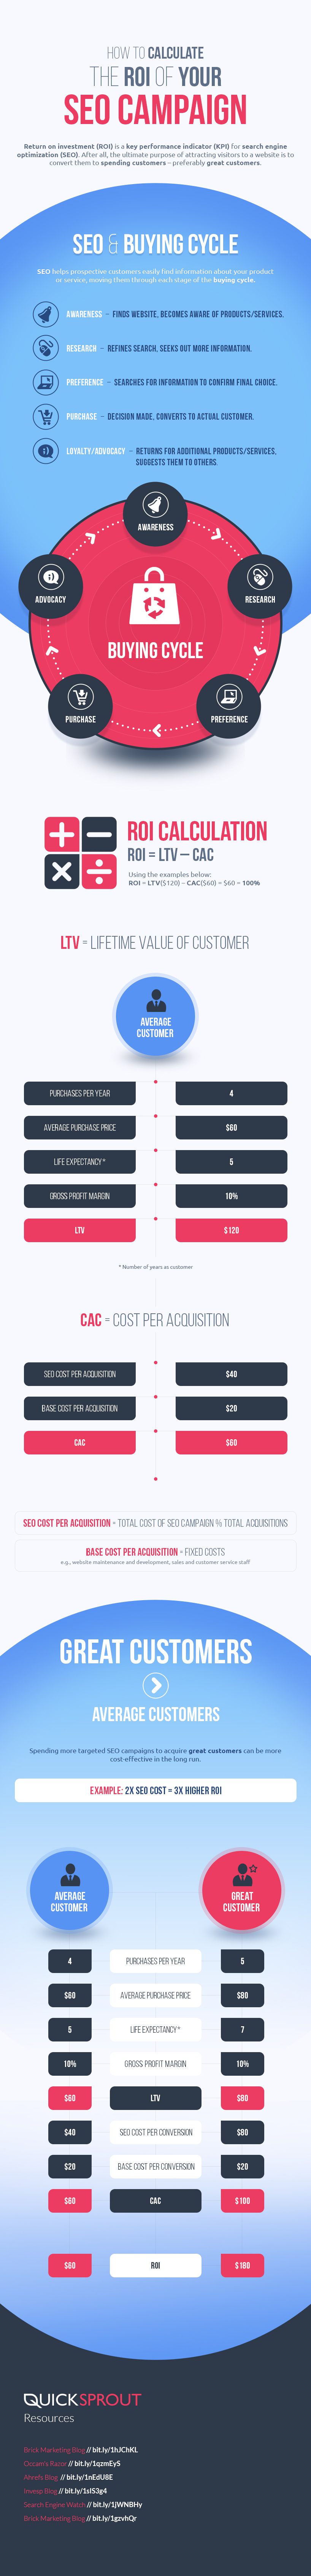 how to calculate ROI on an SEO campaign